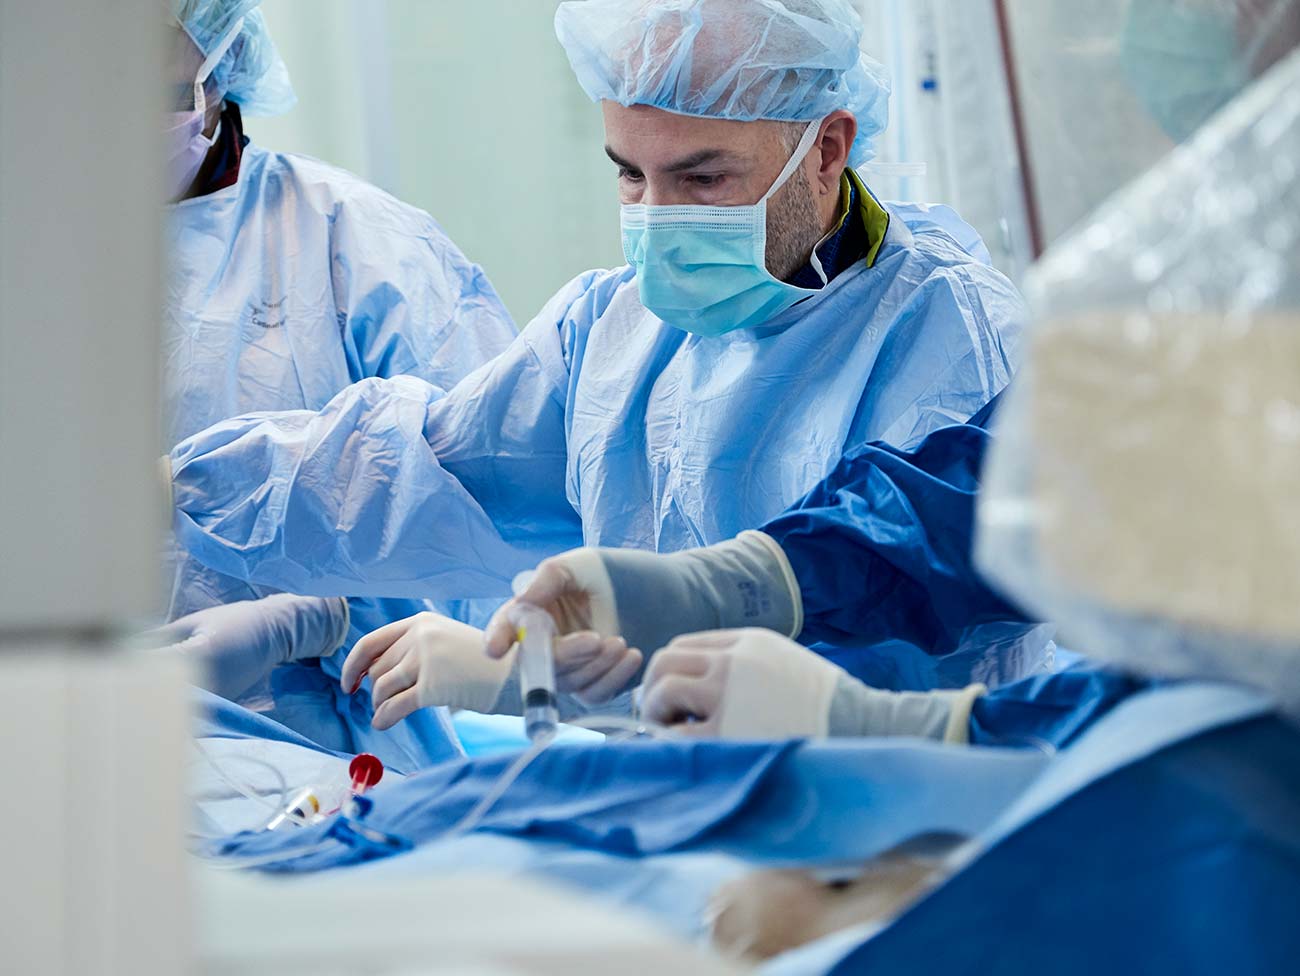 man wearing scrubs and a surgical mask performing surgery on a patient 